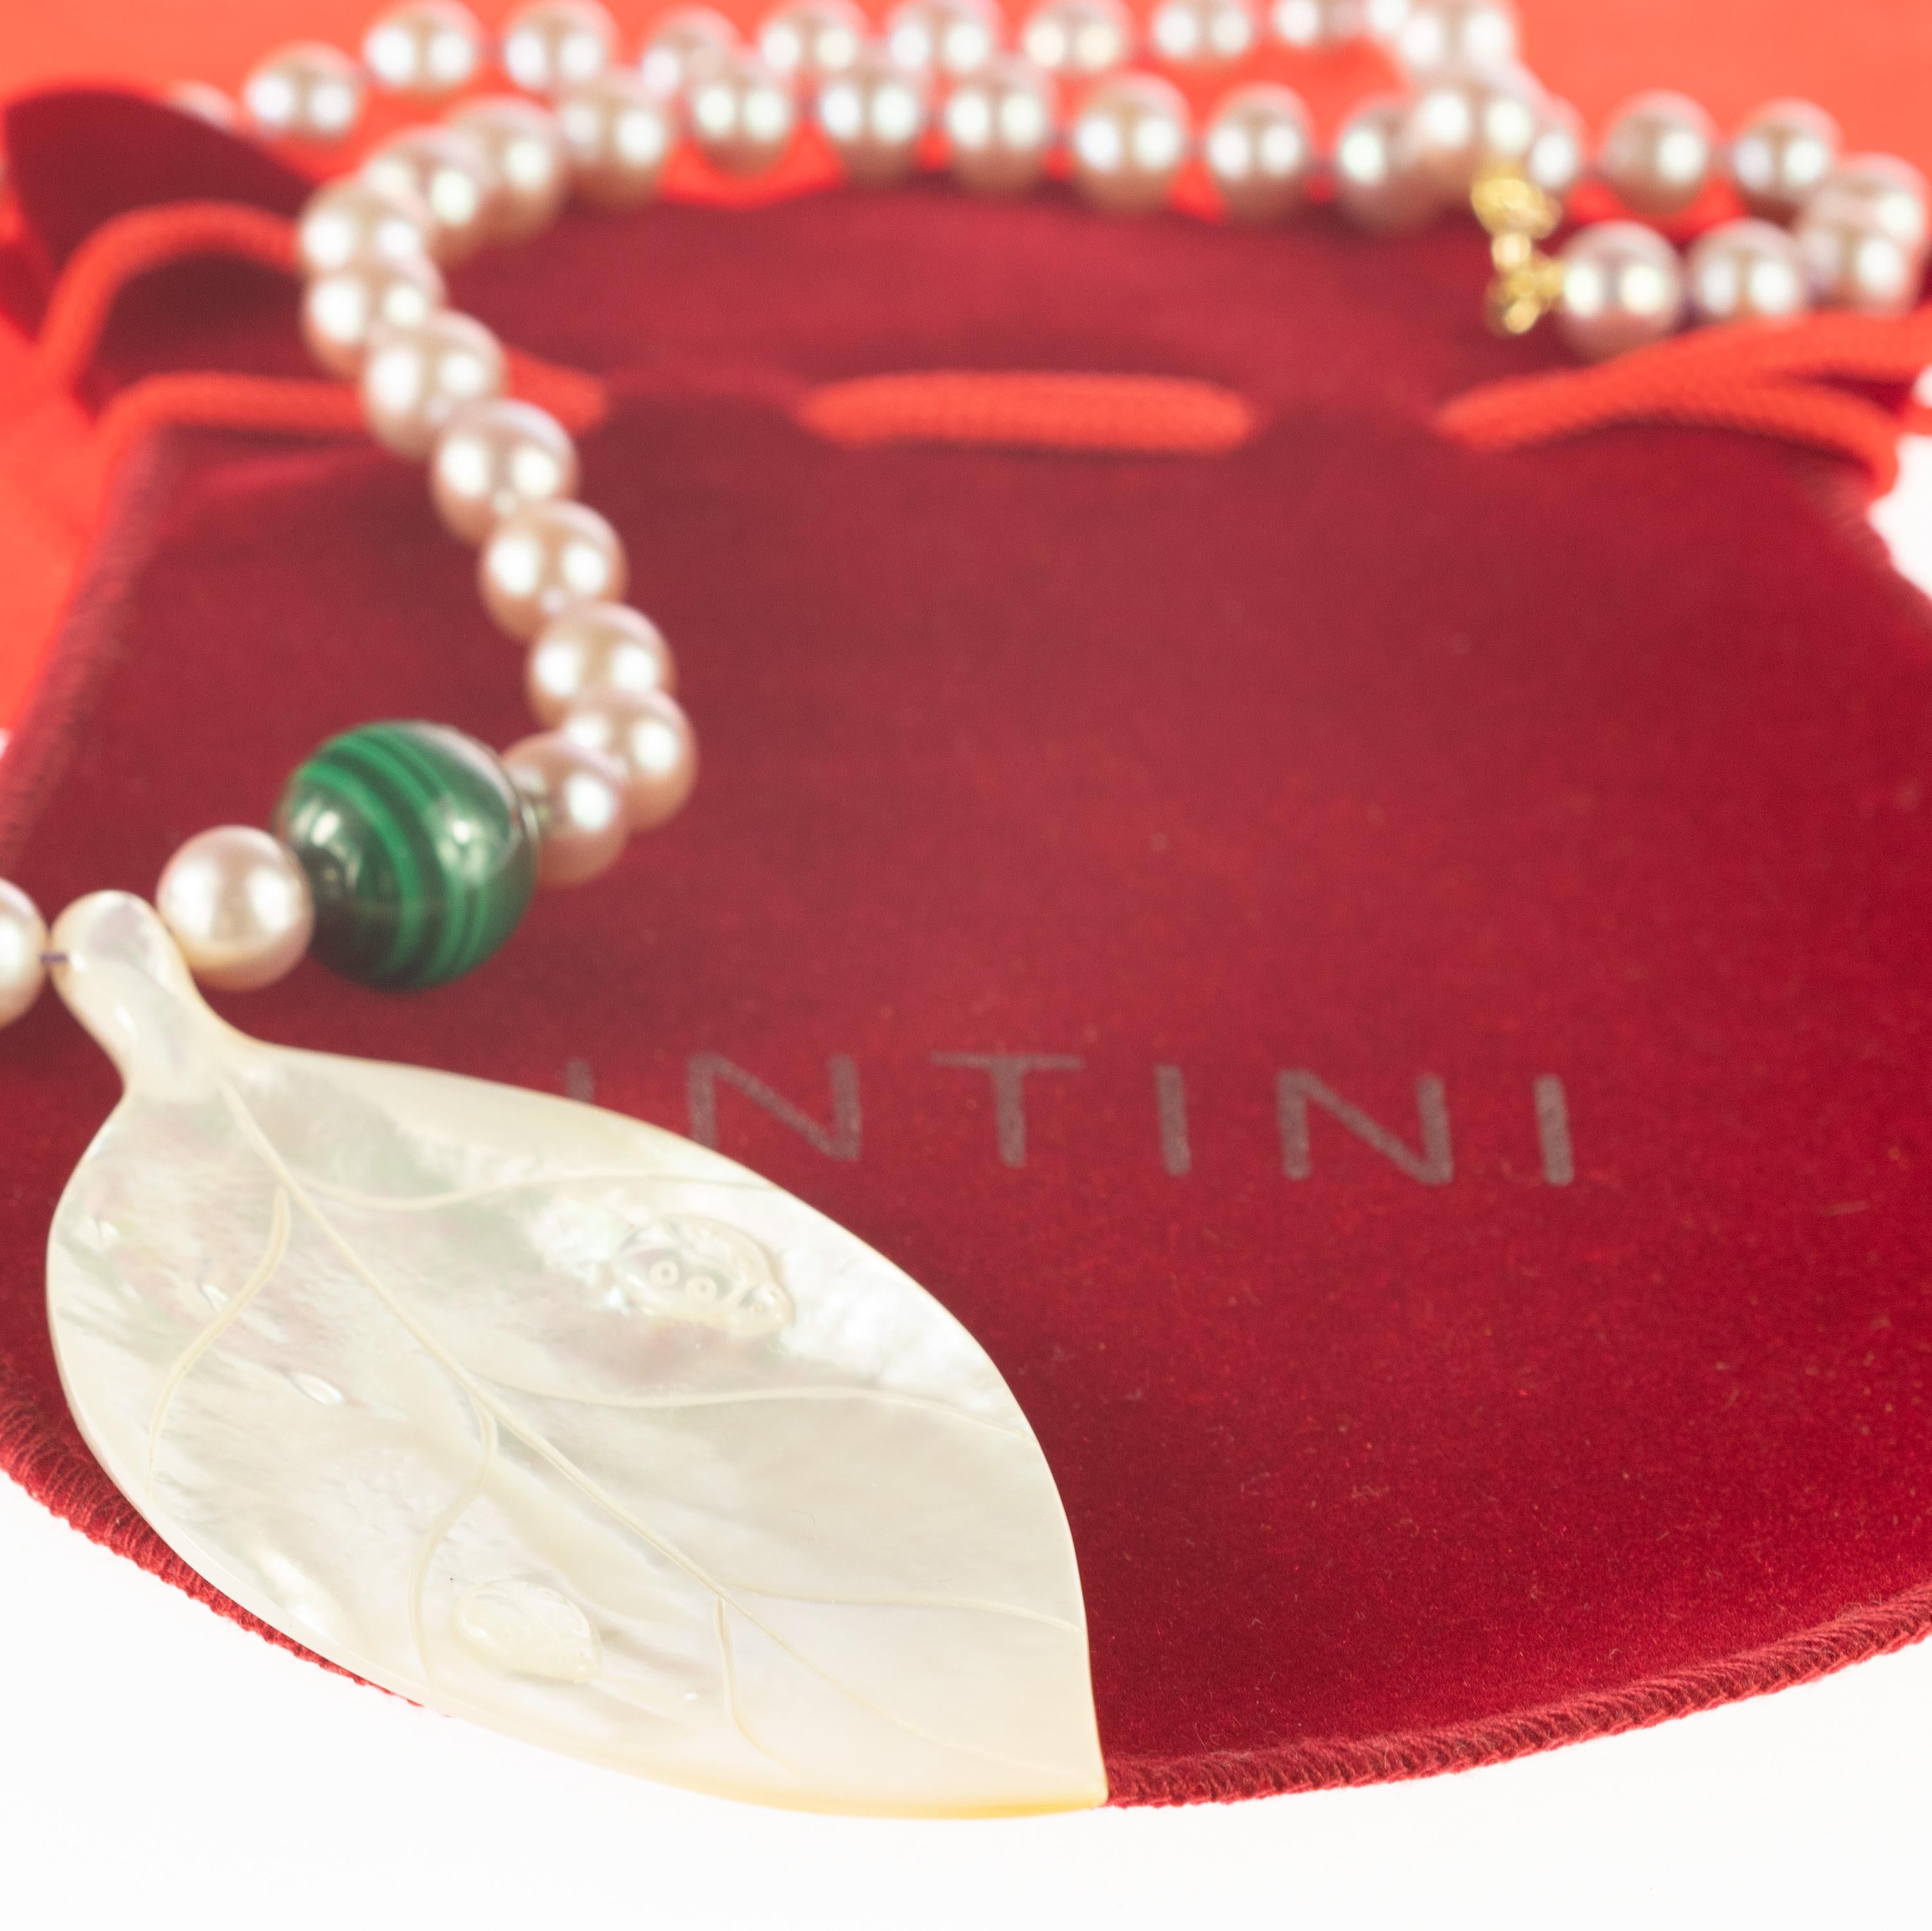 First class natural freshwater pink pearls with an elegant closure in 14k white gold. An iconic collier for an elegant outfit. A timeless carved and tribal design a natural mother pearl leaf adorned with round malachite spheres. Top quality